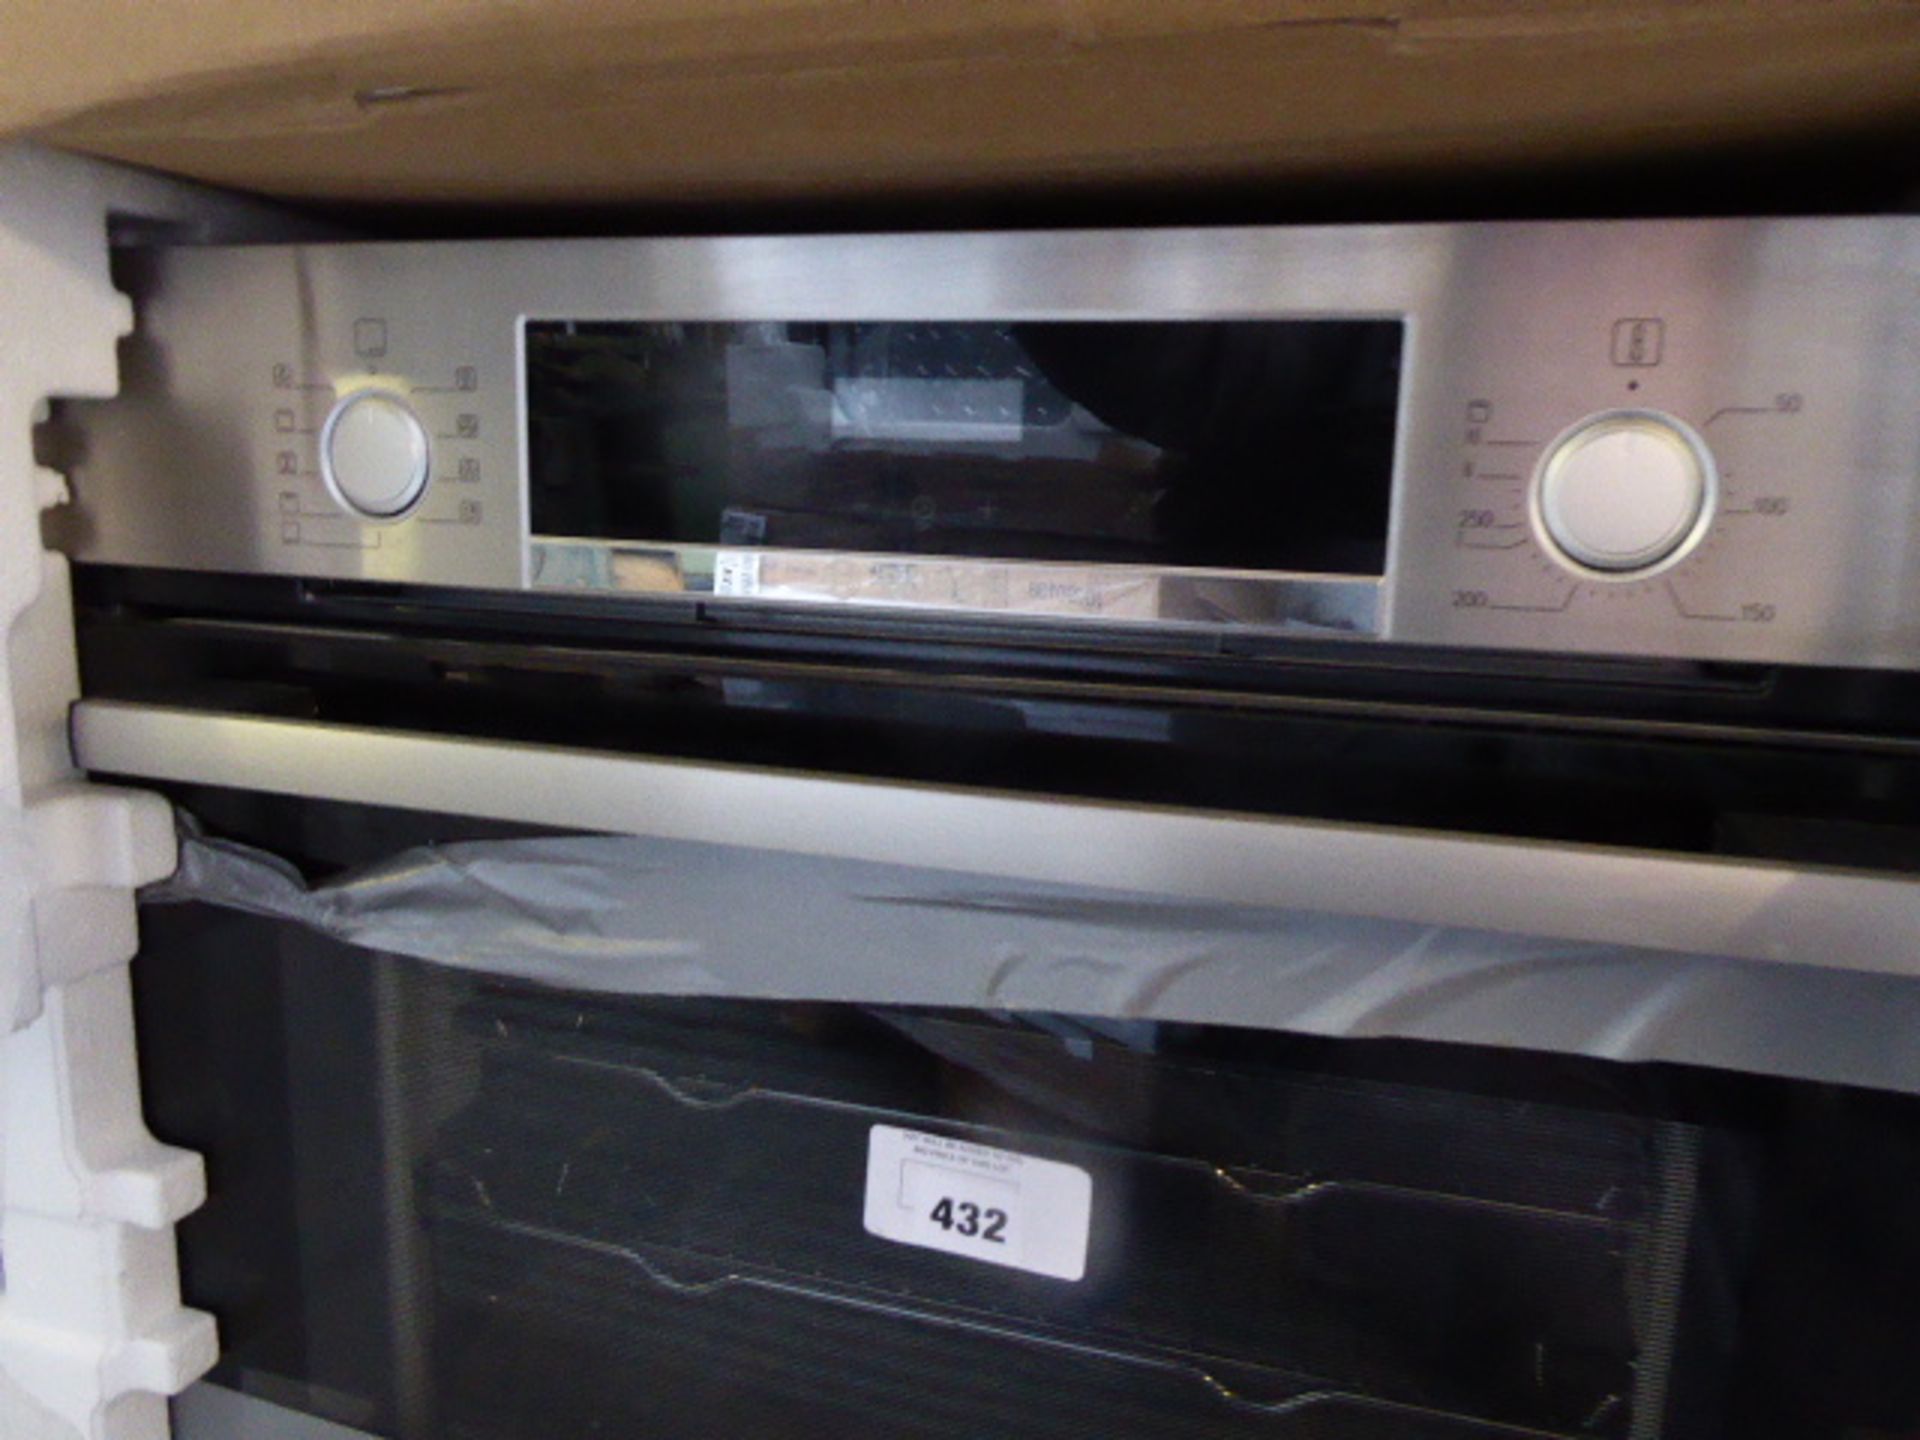 HBS534BS0BB Bosch Oven - Image 2 of 3